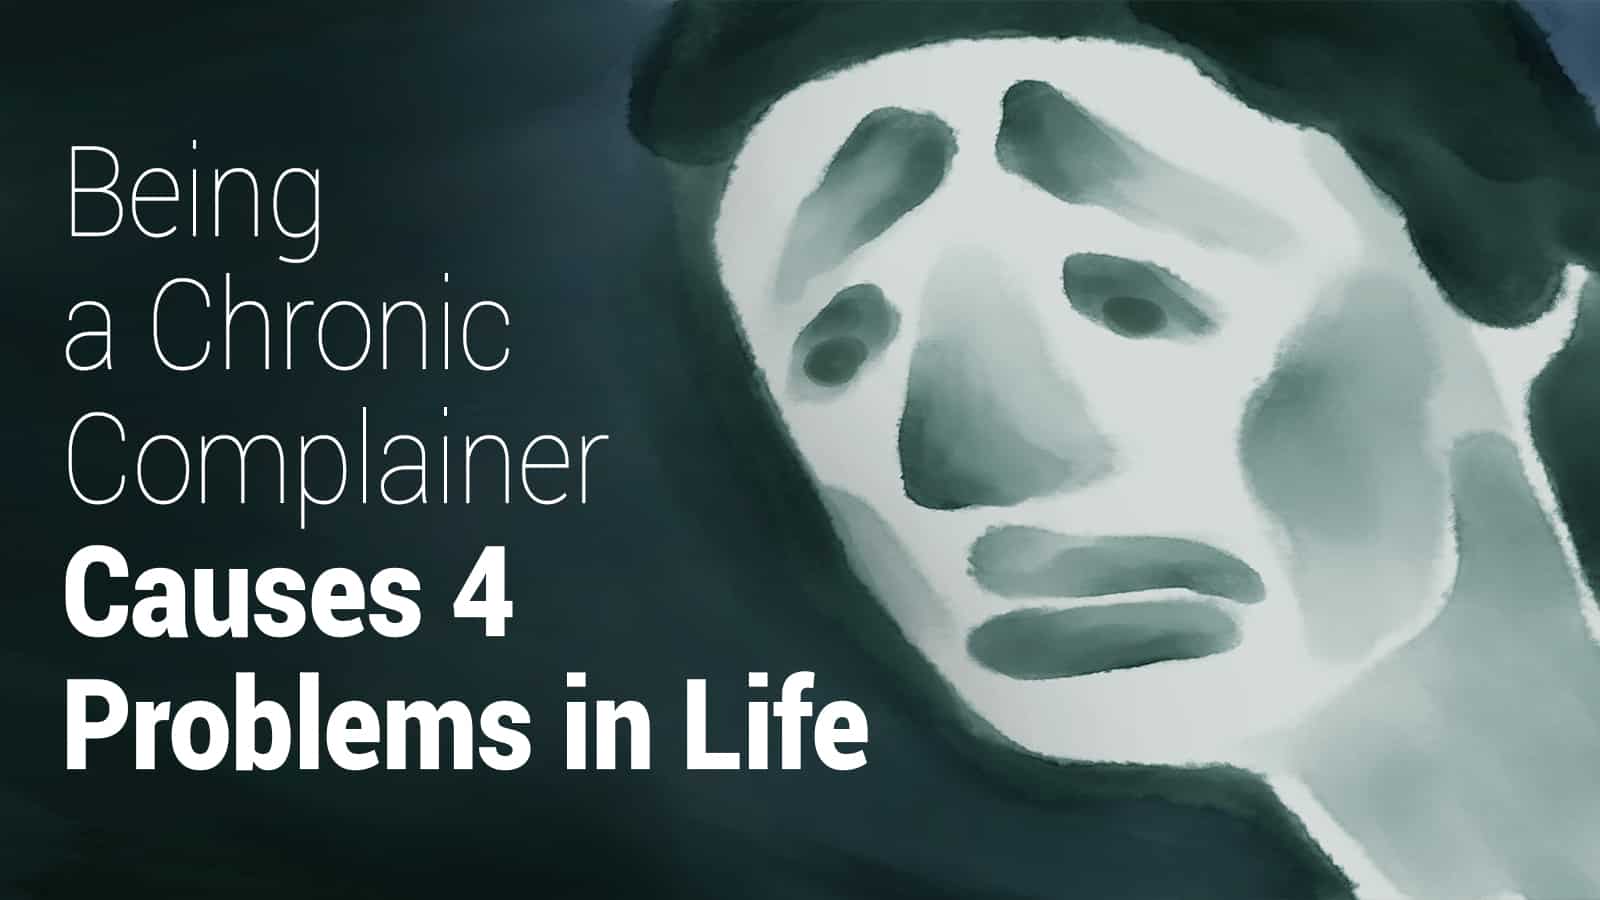 Being a Chronic Complainer Causes 4 Problems in Life